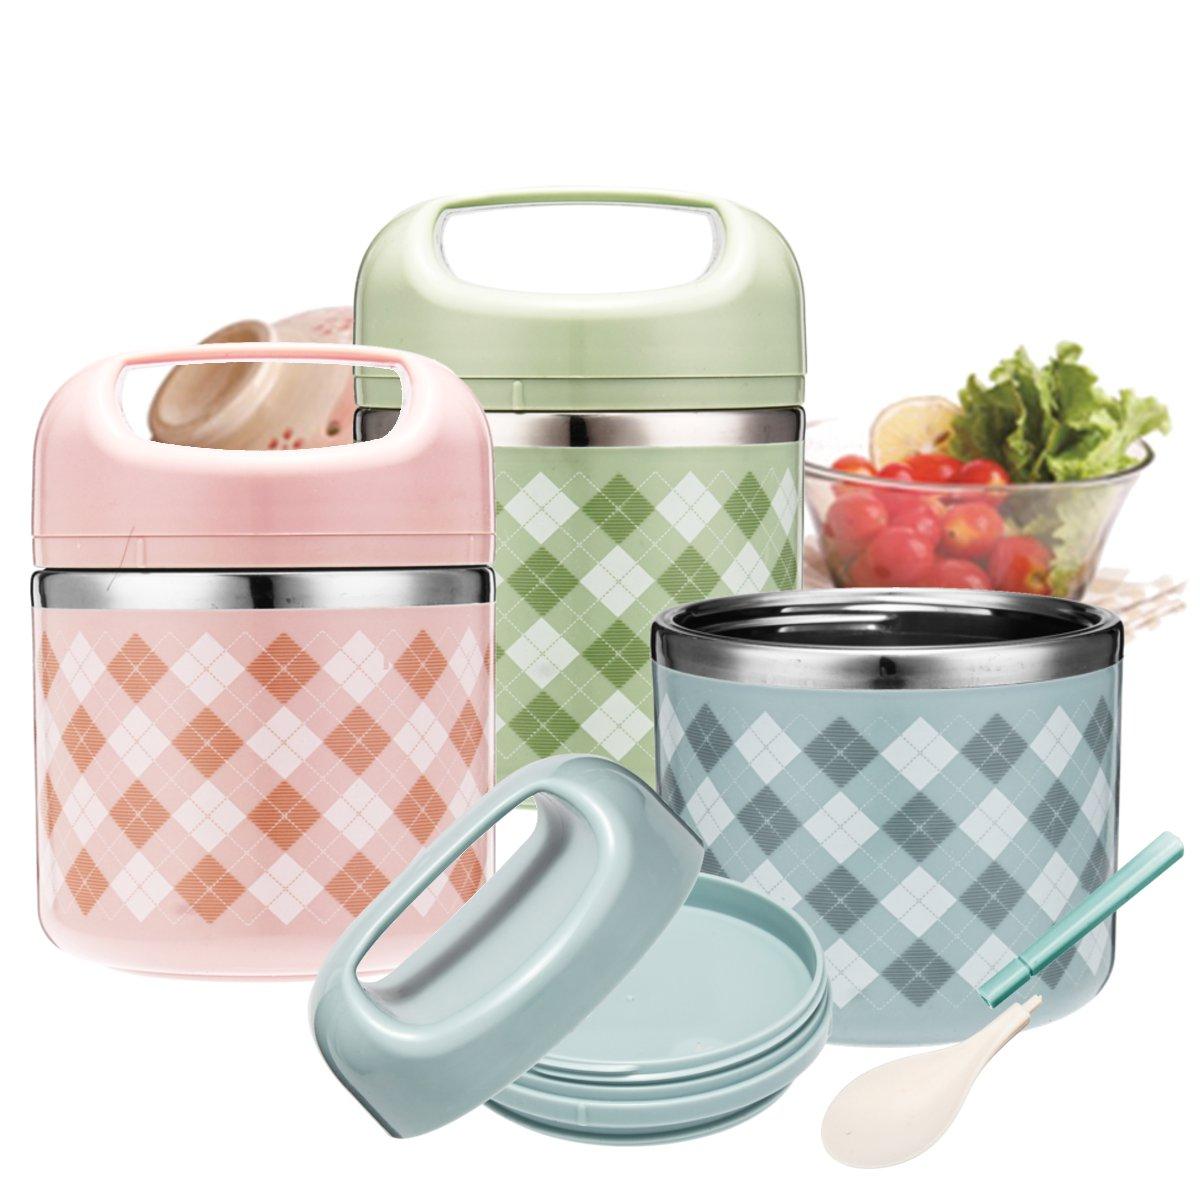 Vacu?m?draagbare?roestvrij?stalen?lunchbox?picknick Thermos voedsel opslagcontainer